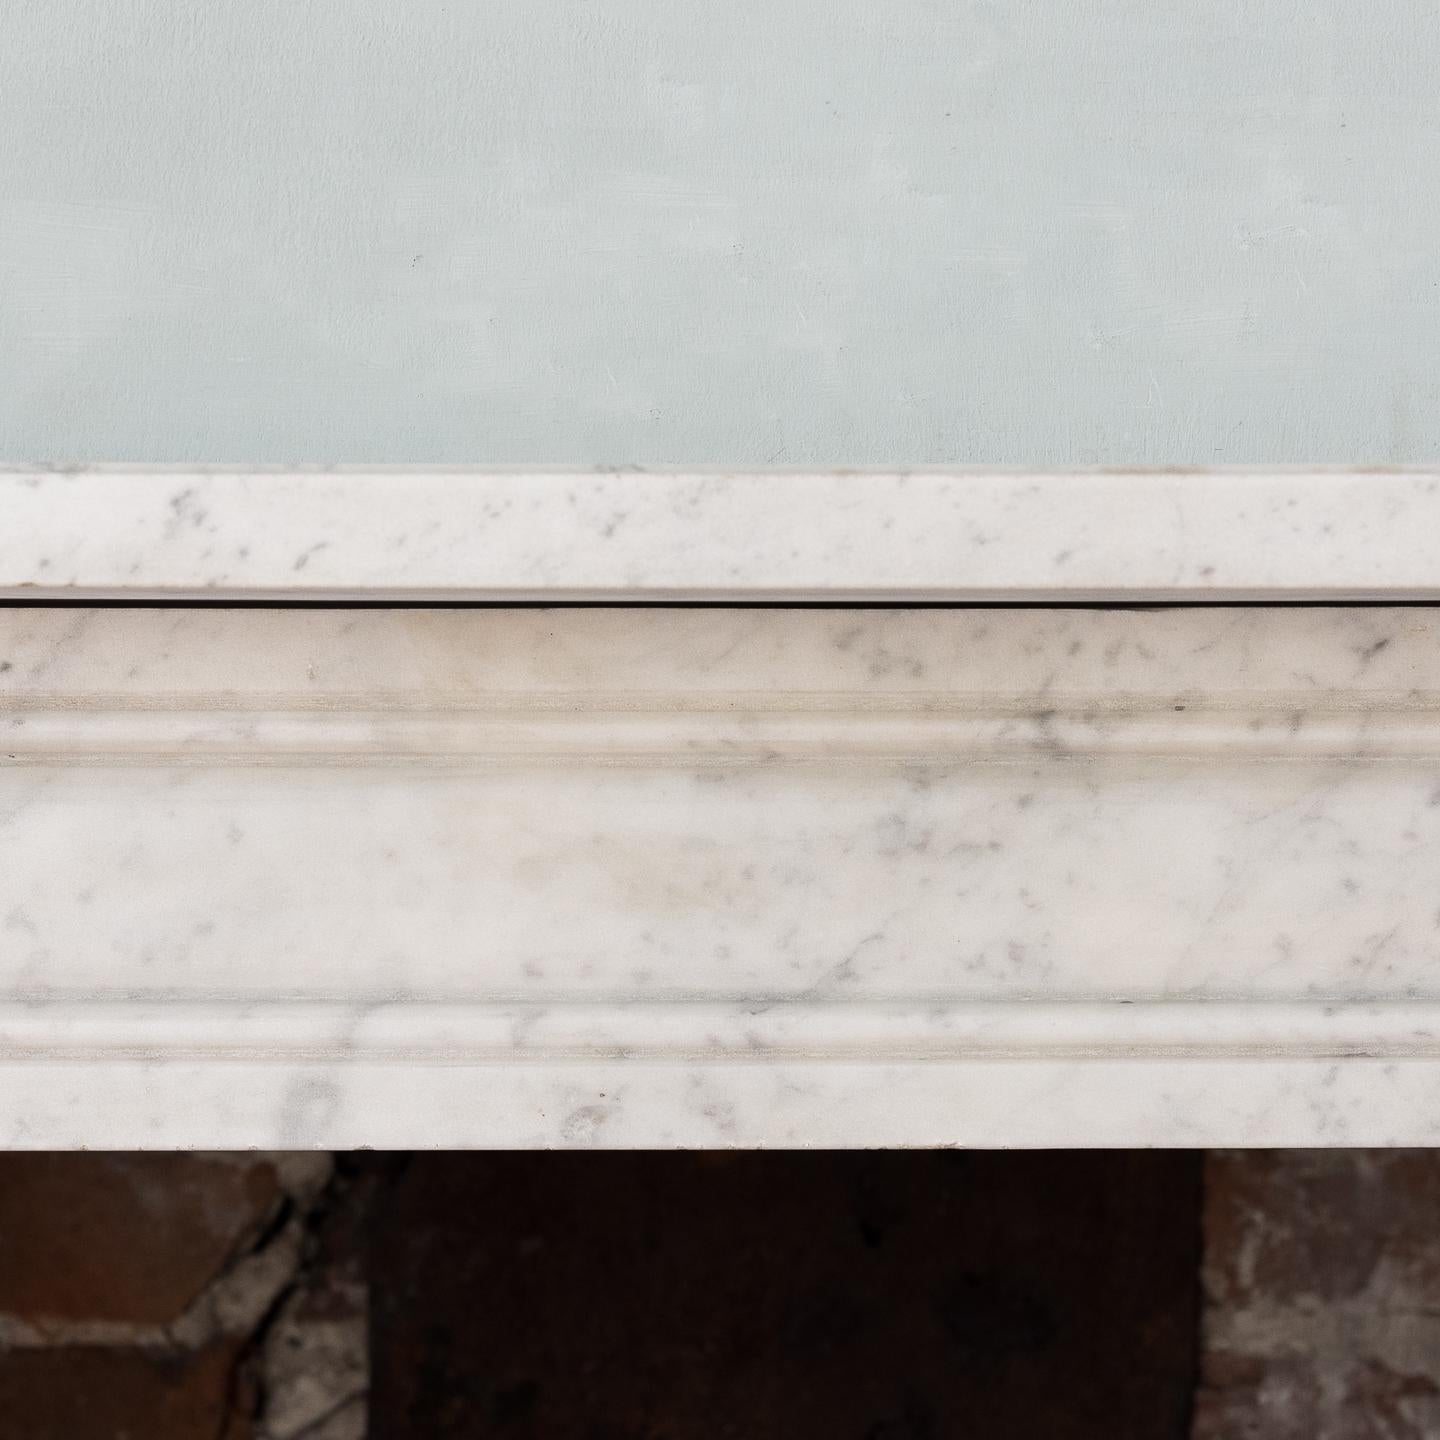 British Regency Style Carrara Marble Fireplace with Peacock's Eye Roundels